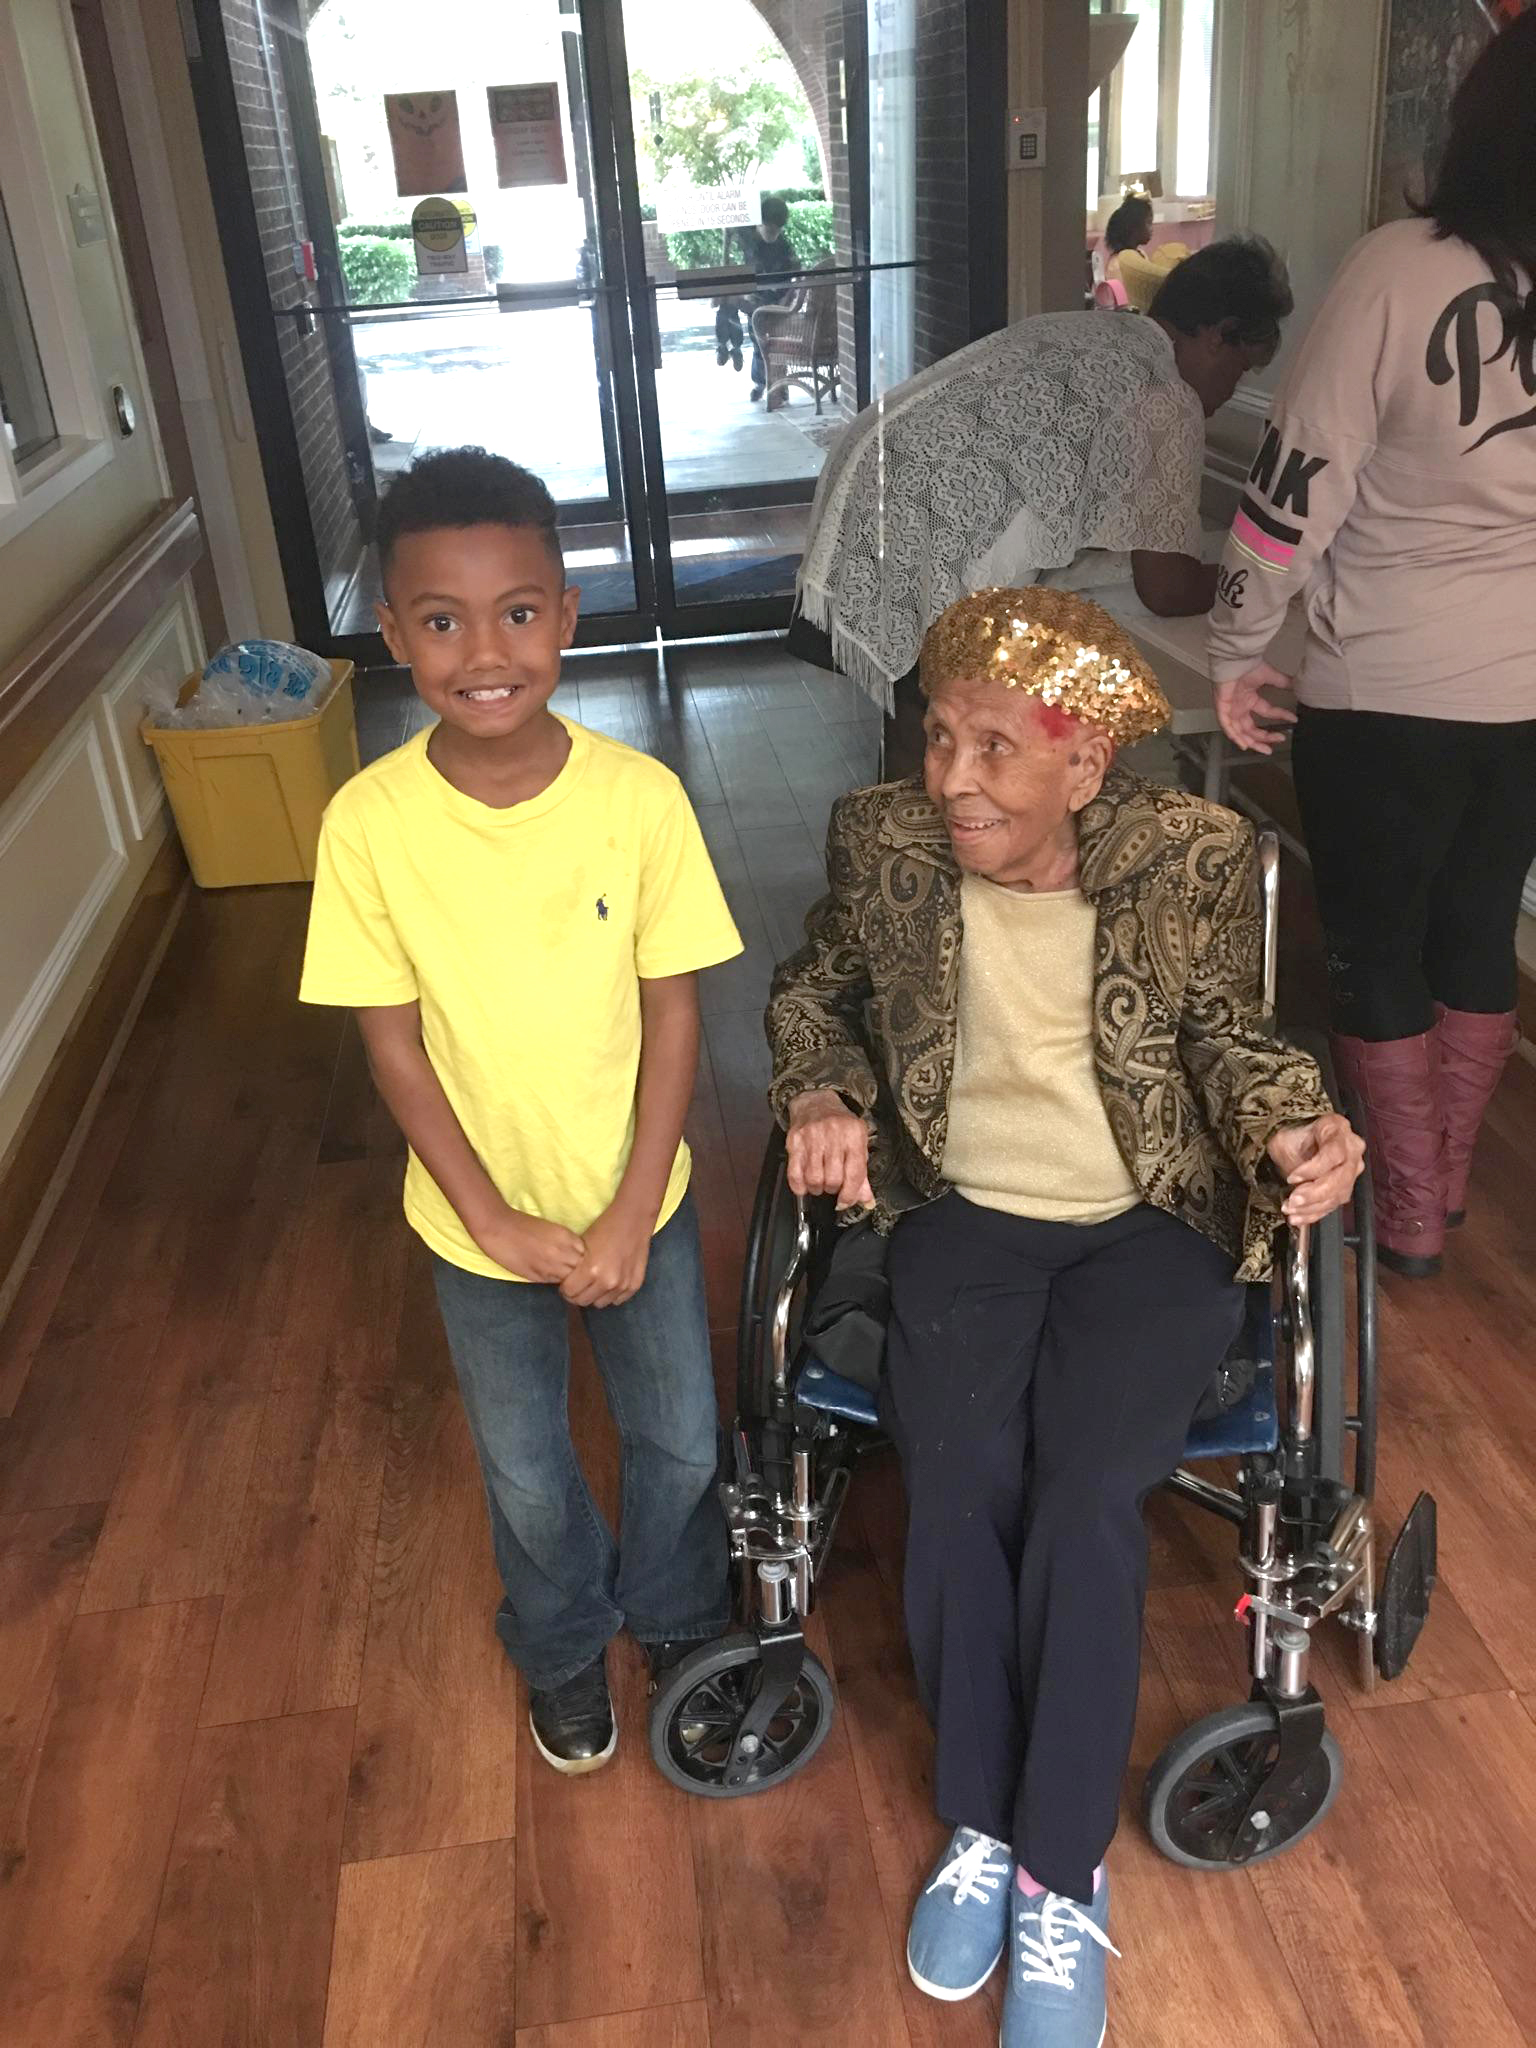 PHOTO: Lena Hall of Louisville, Kentucky, celebrated her 105th birthday on Sunday with her family.